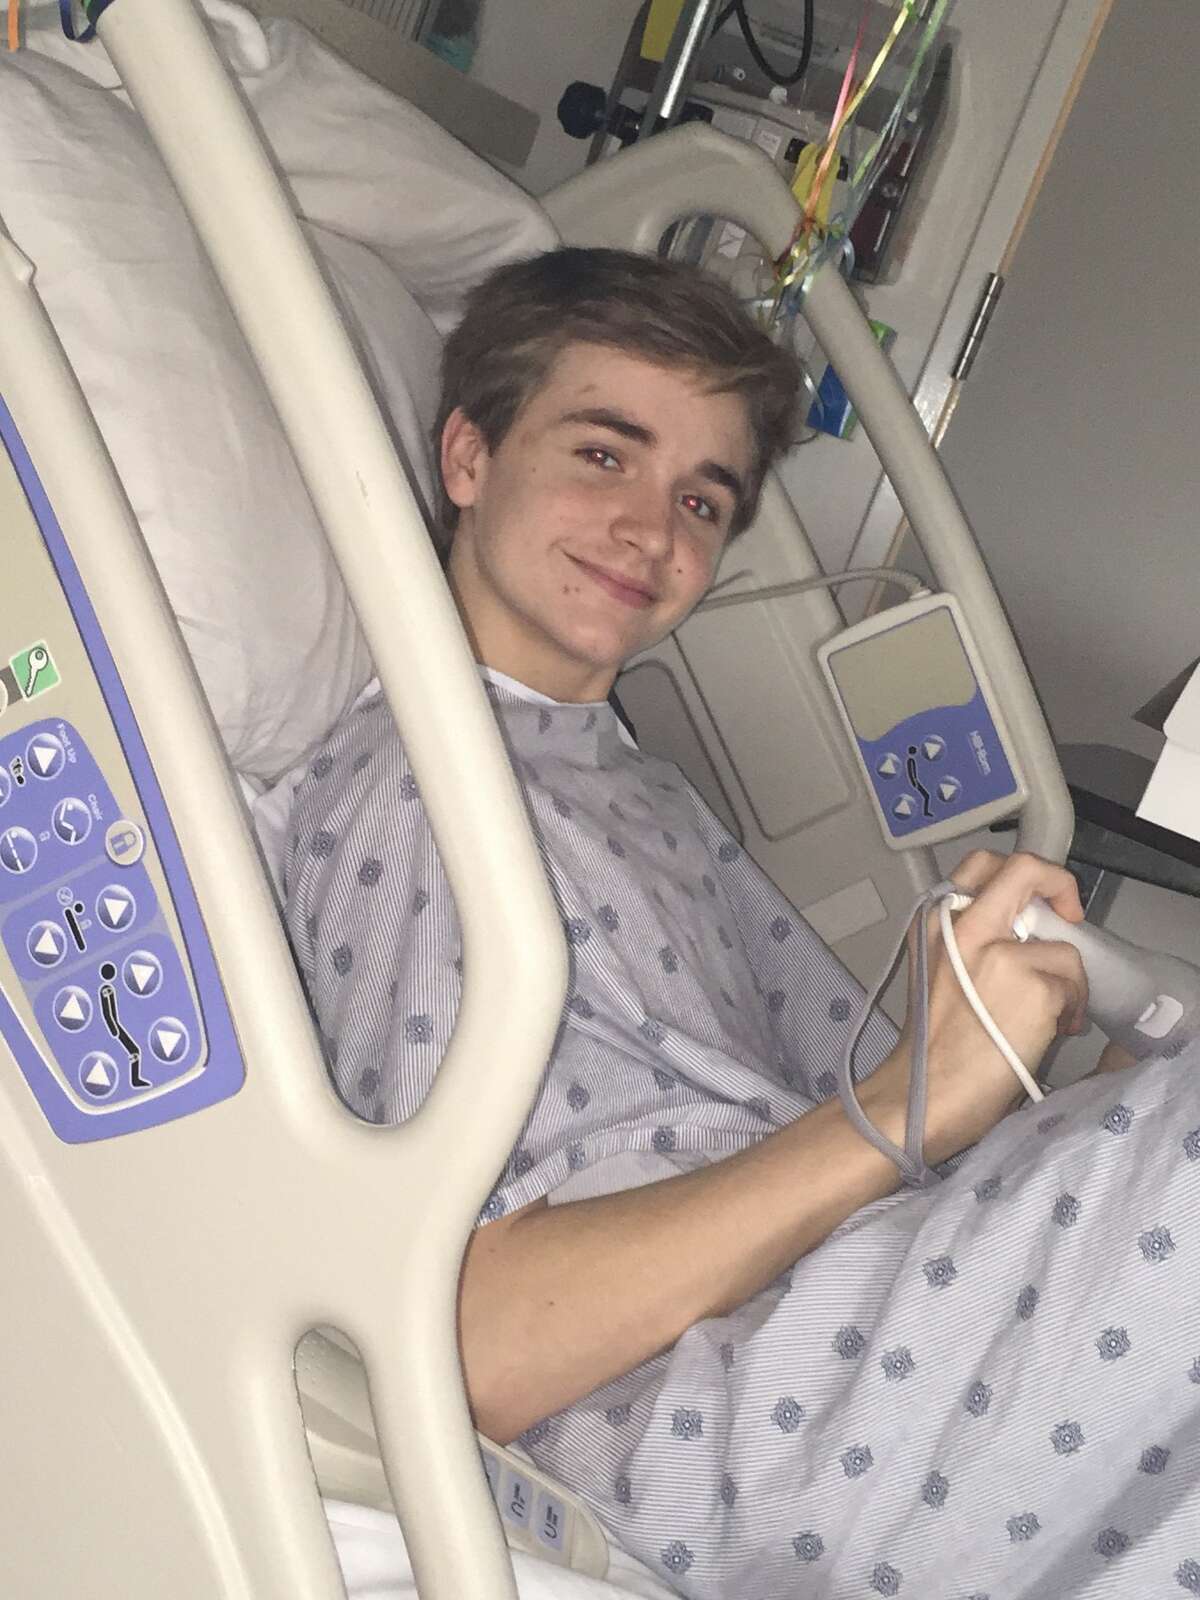 Walker Johnson spent time recovering at Texas Children's Hospital after what his family was told is the only documented case of a heart stopping and starting without help.